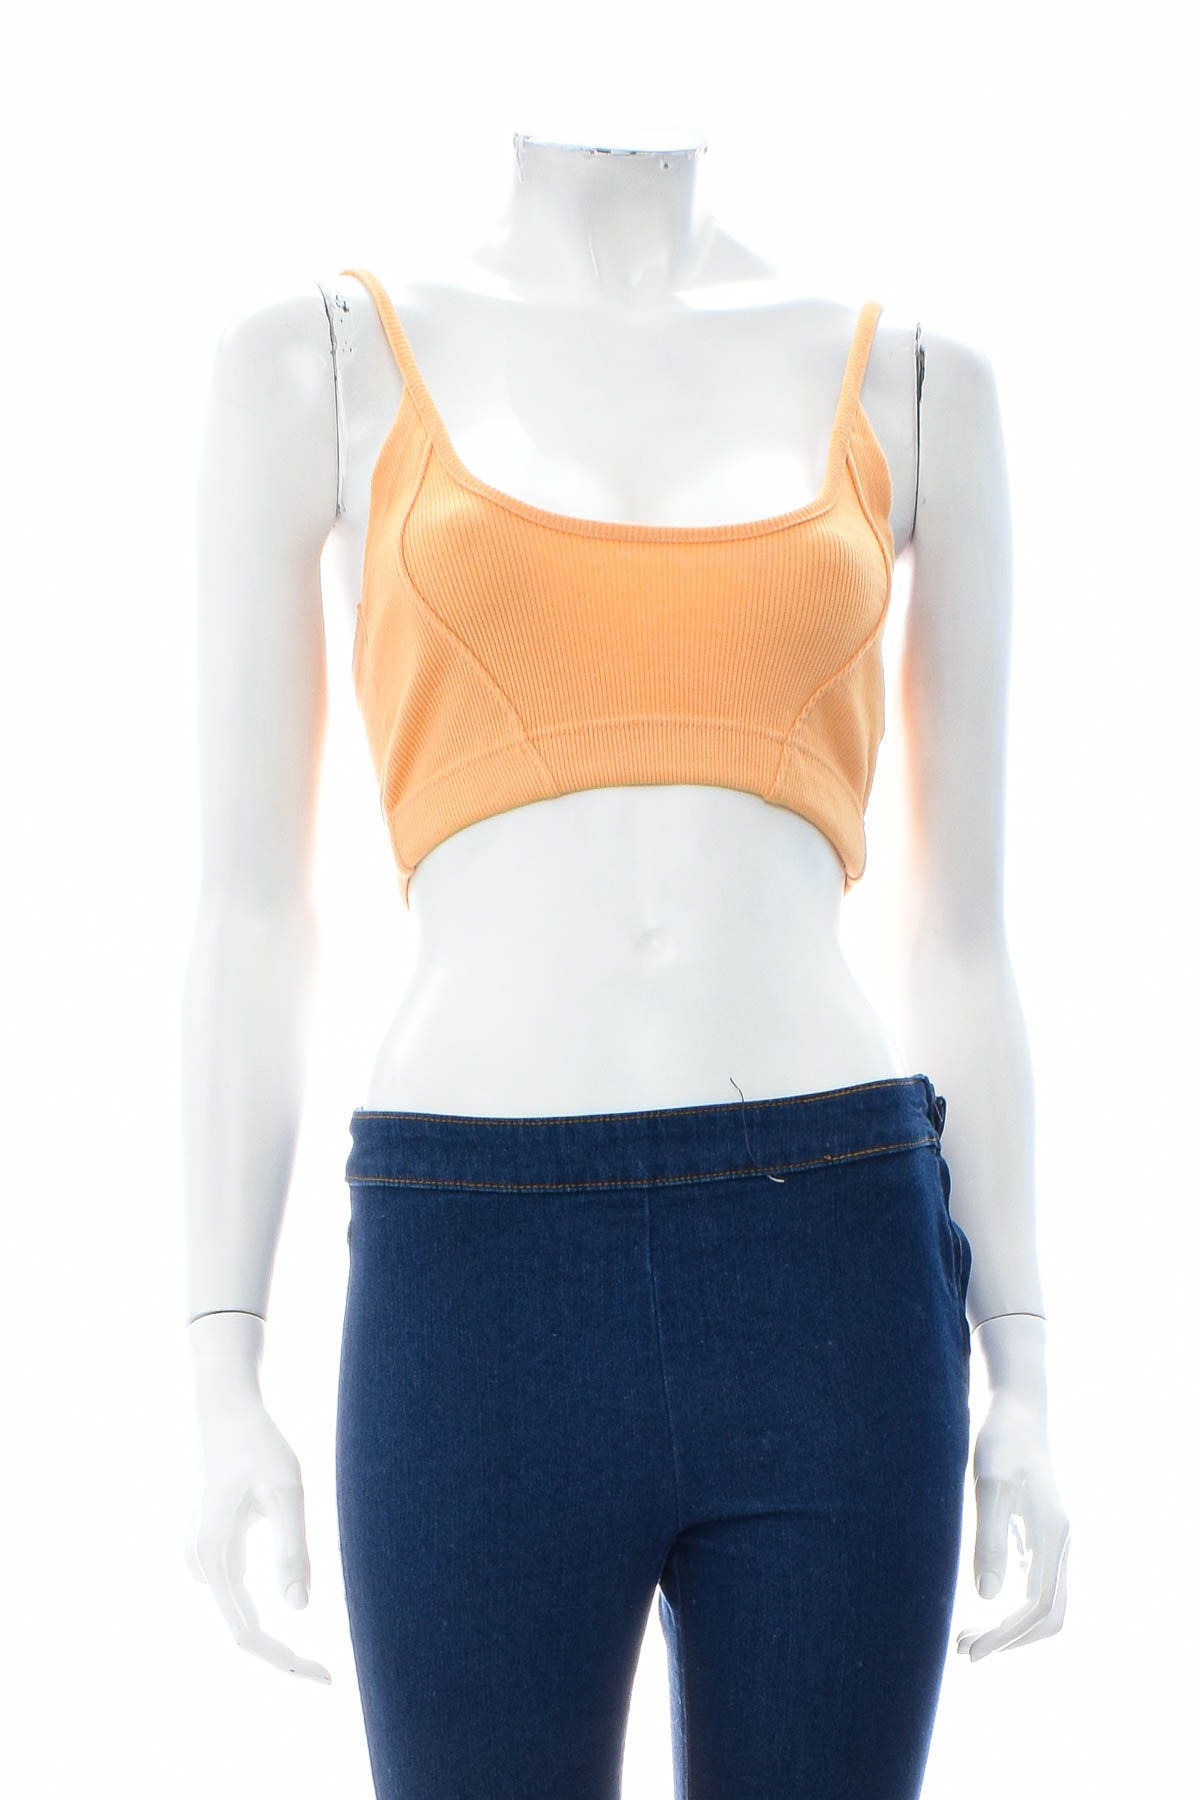 Women's top - Re_Styld - 0